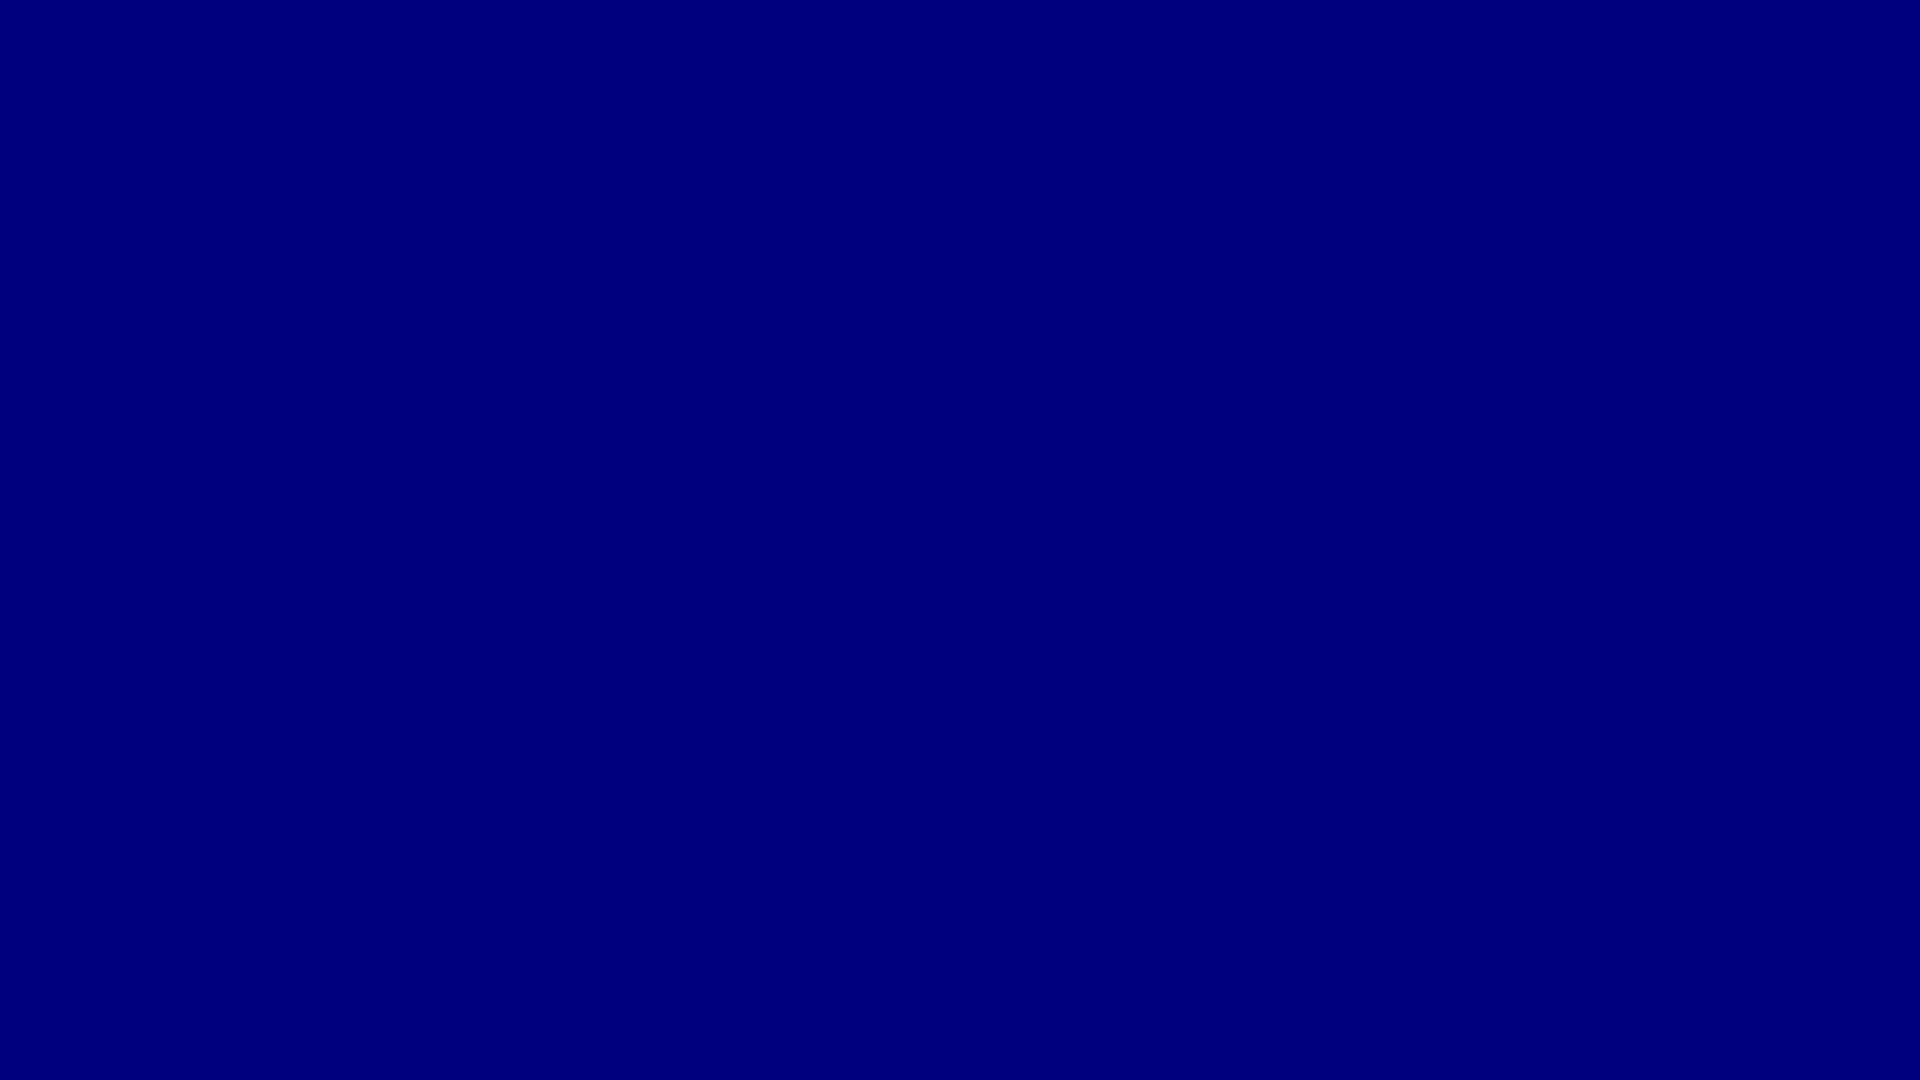 Plain Solid Navy Blue Background